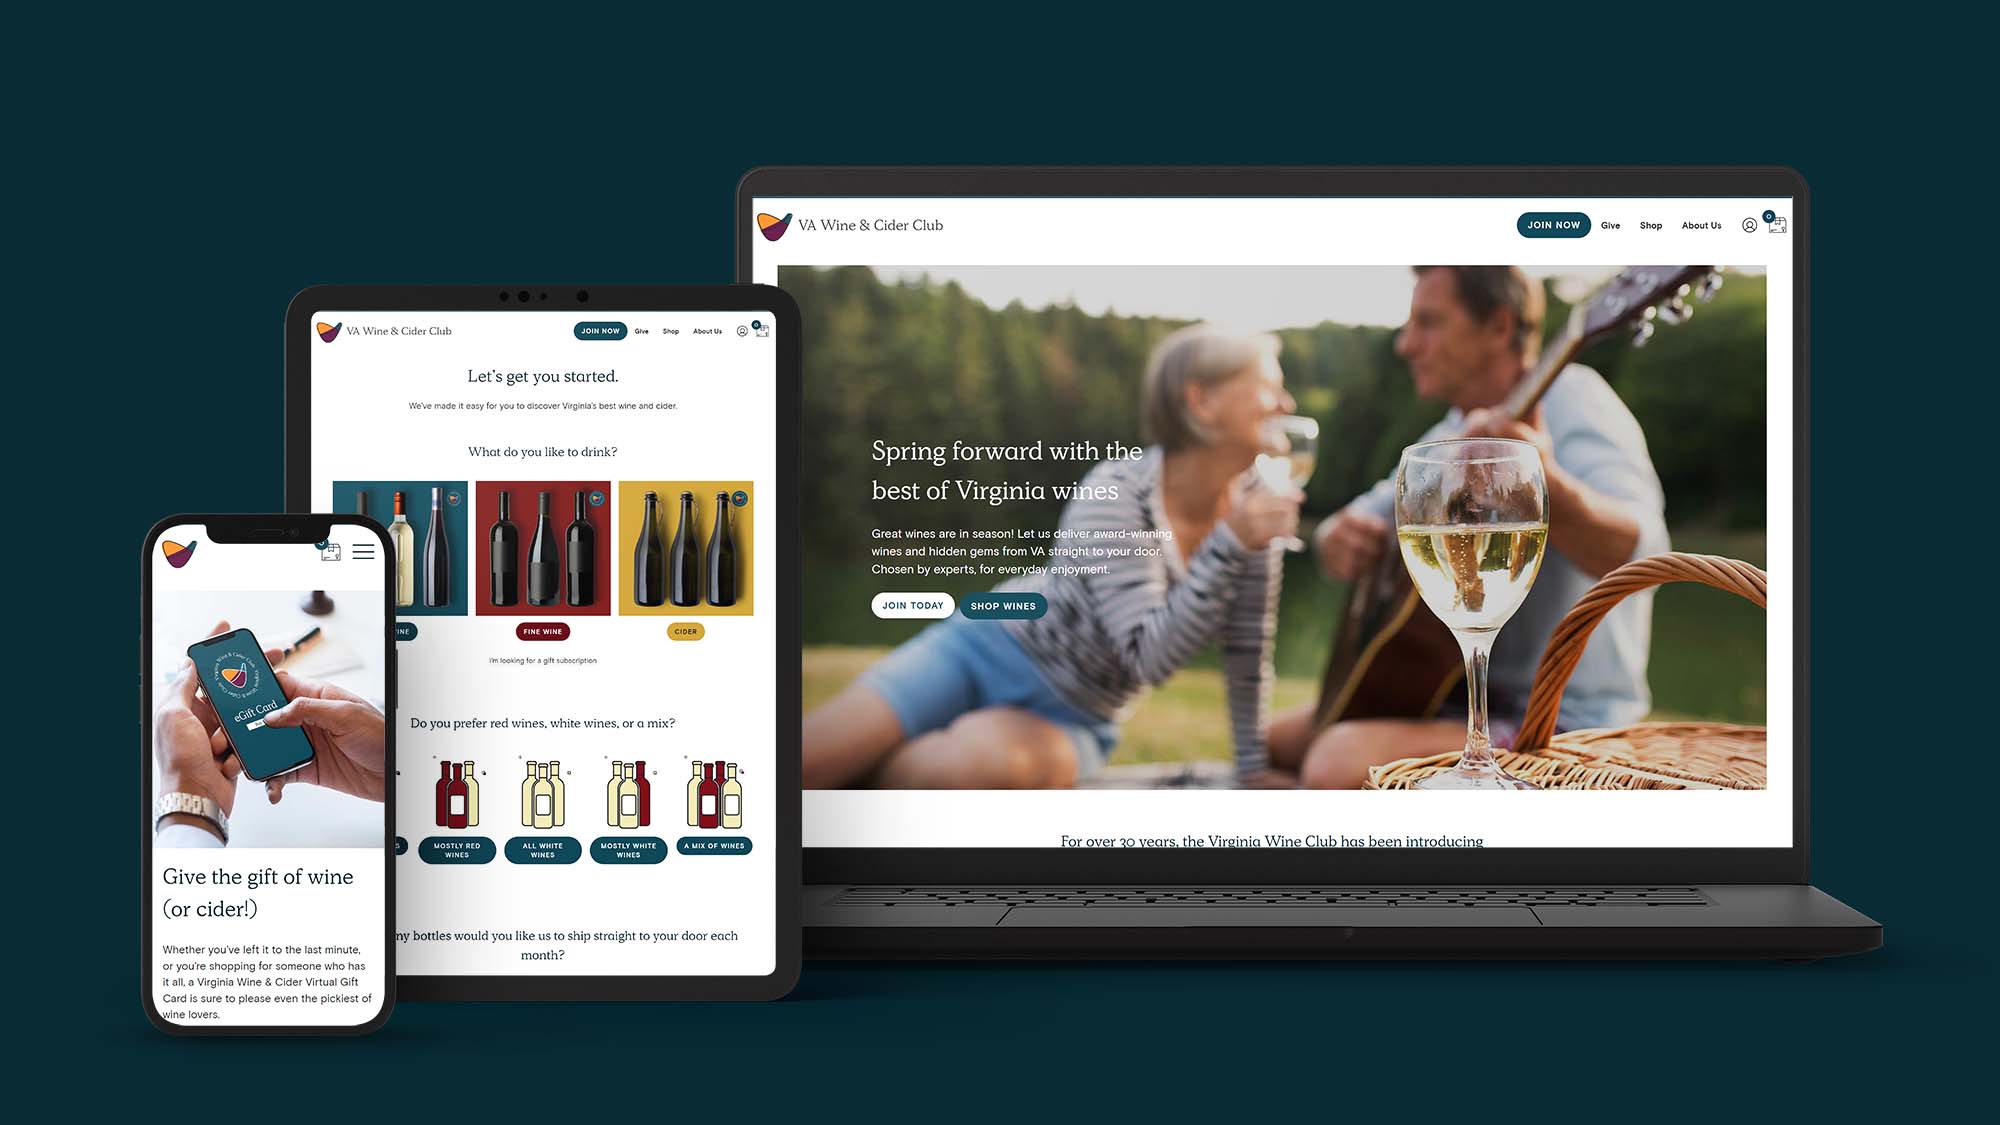 Two electronic devices displaying websites: a smartphone showcases colorful corkscrews and gift options, while a laptop displays a webpage about virginia wines, featuring an image of an elderly couple enjoying a picnic with wine.